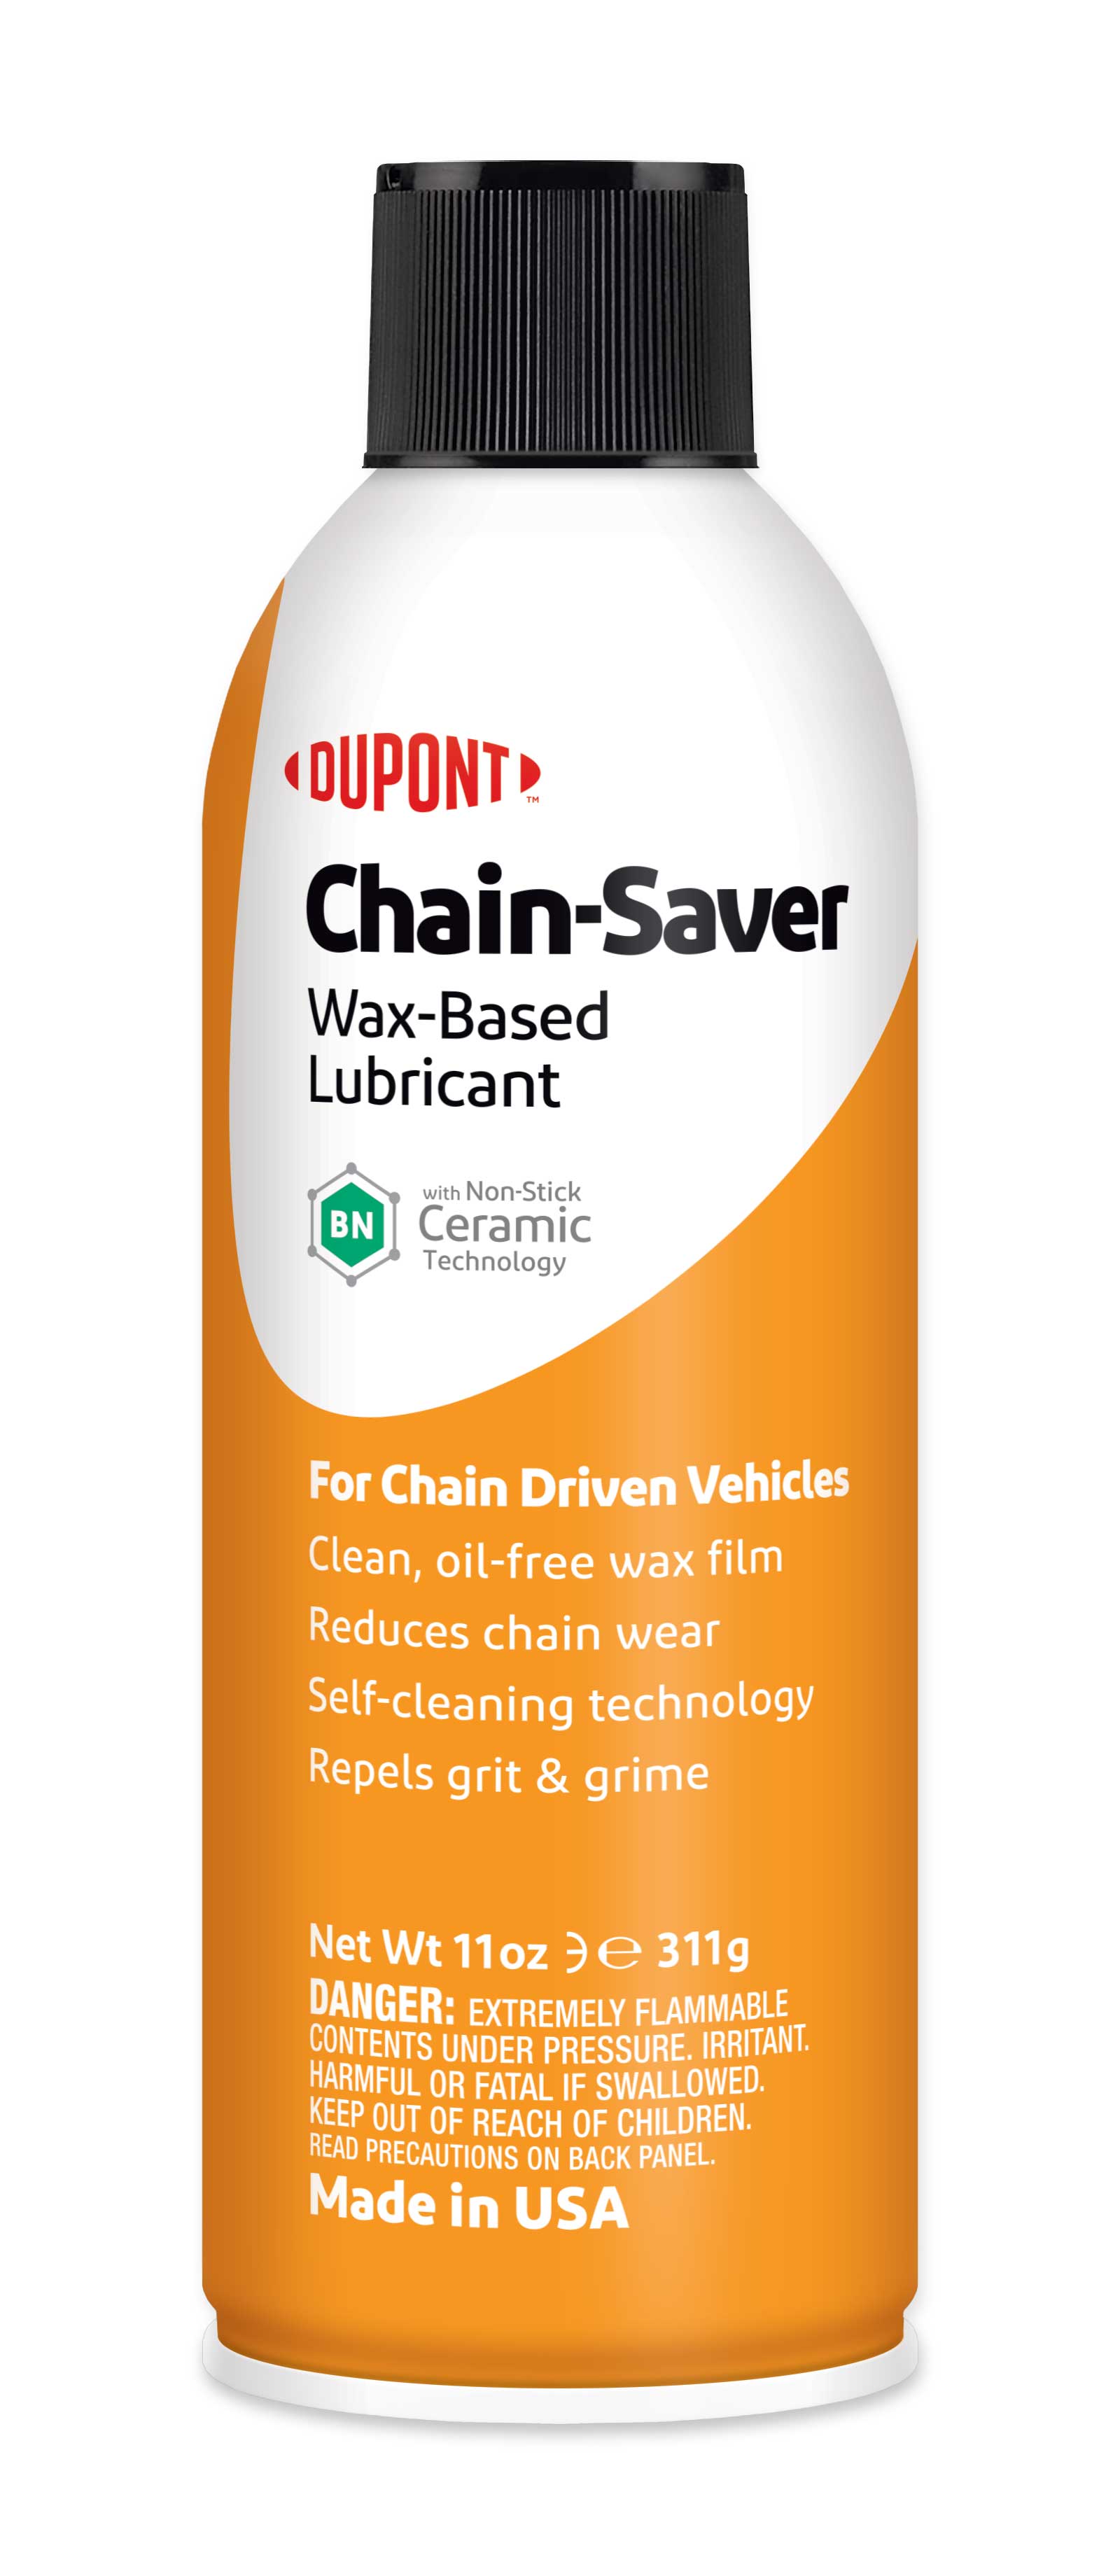 DuPont Motorcycle Chain-Saver Wax-Based Self-Cleaning Dry Lubricant, 11oz - image 1 of 5